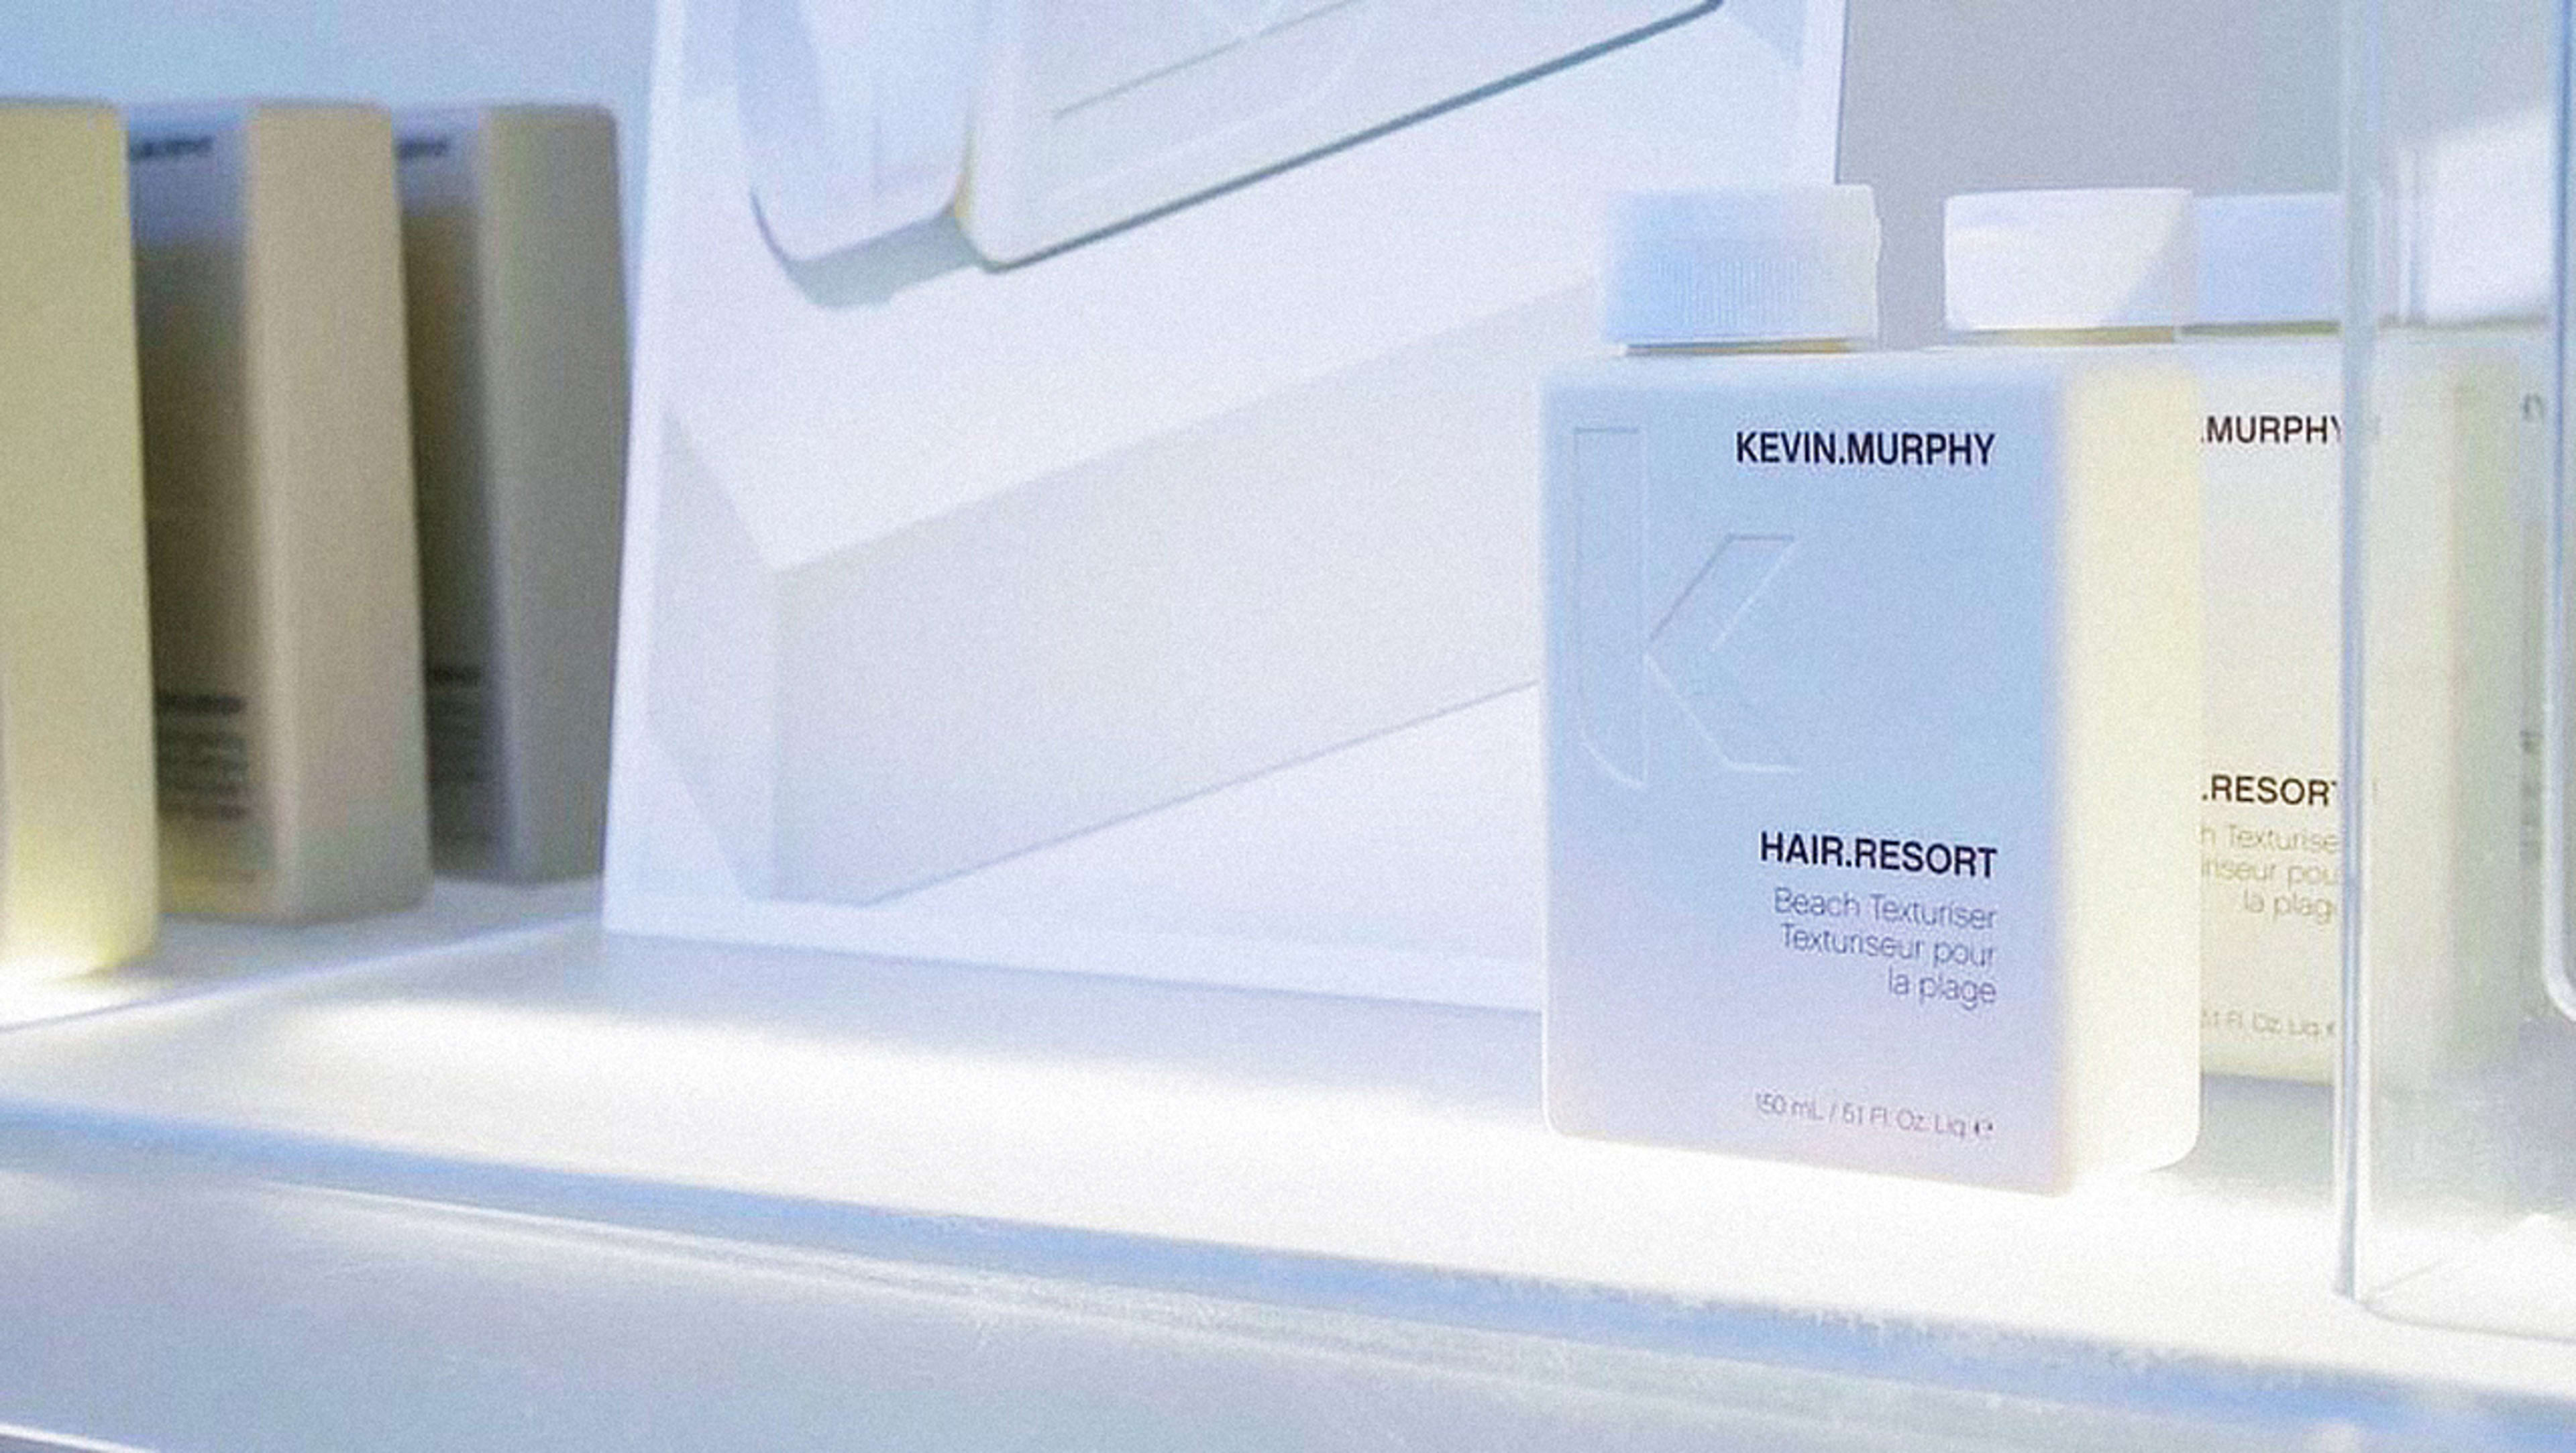 This beauty brand will source 100% of its packaging from ocean plastic